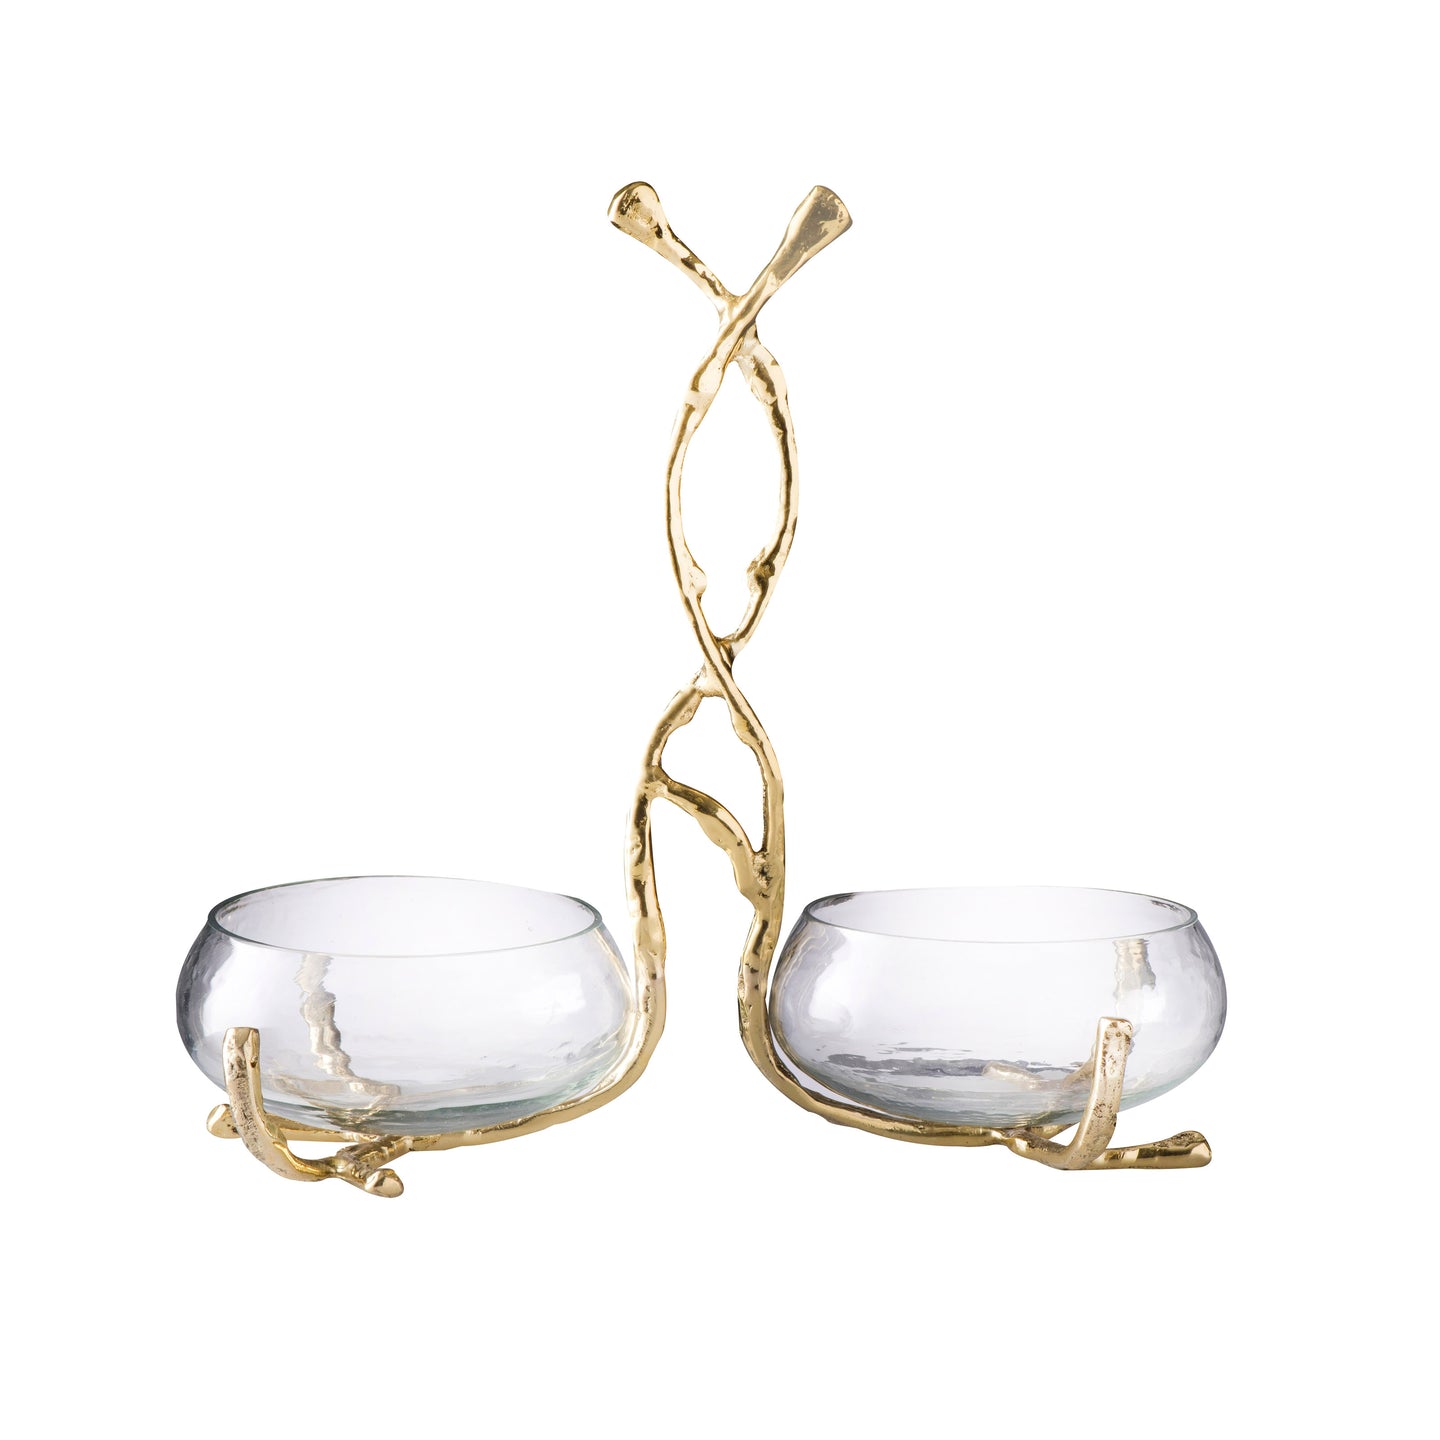 2 Sectional Glass Relish Dish With Gold Twig Design